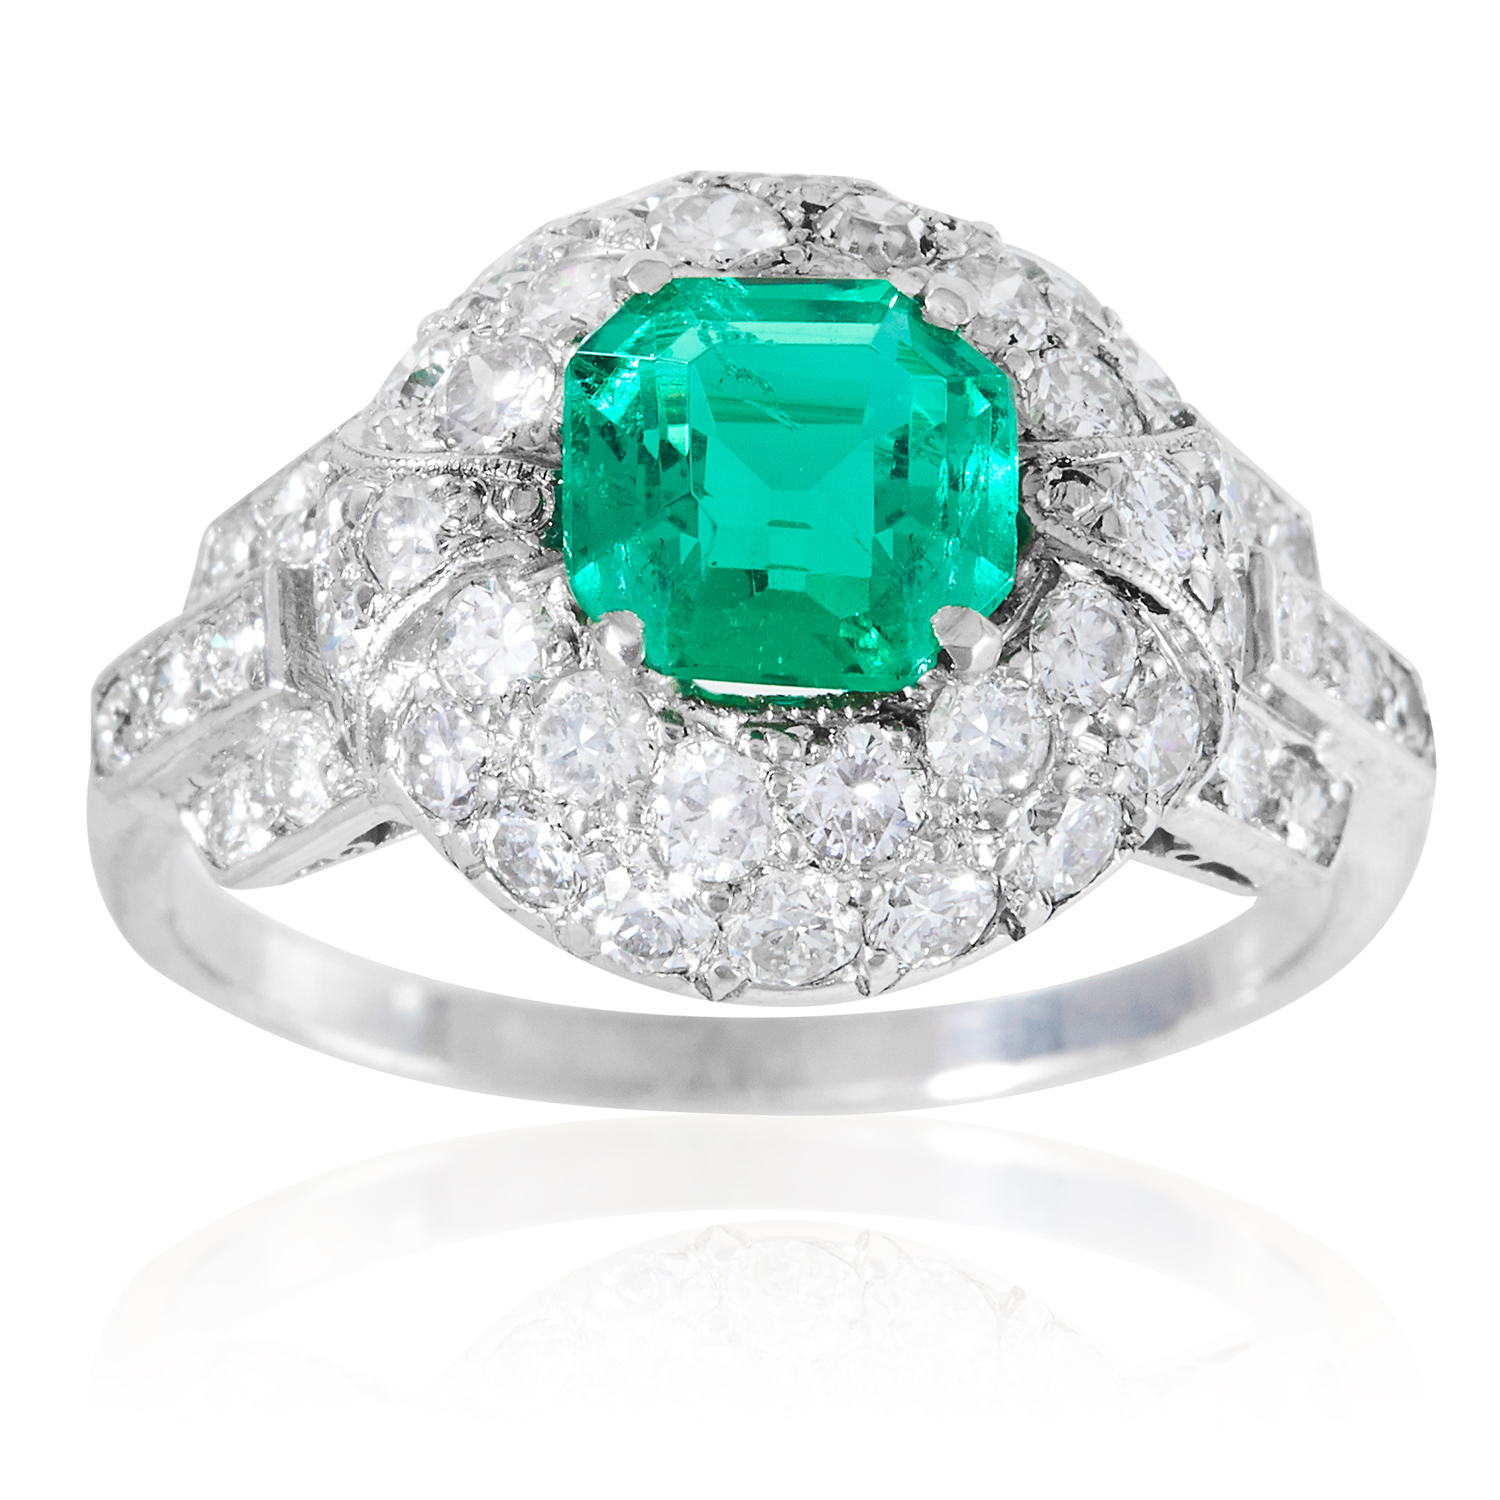 A COLOMBIAN 1.05 CARAT EMERALD AND DIAMOND DRESS RING in white gold or platinum, set with a square